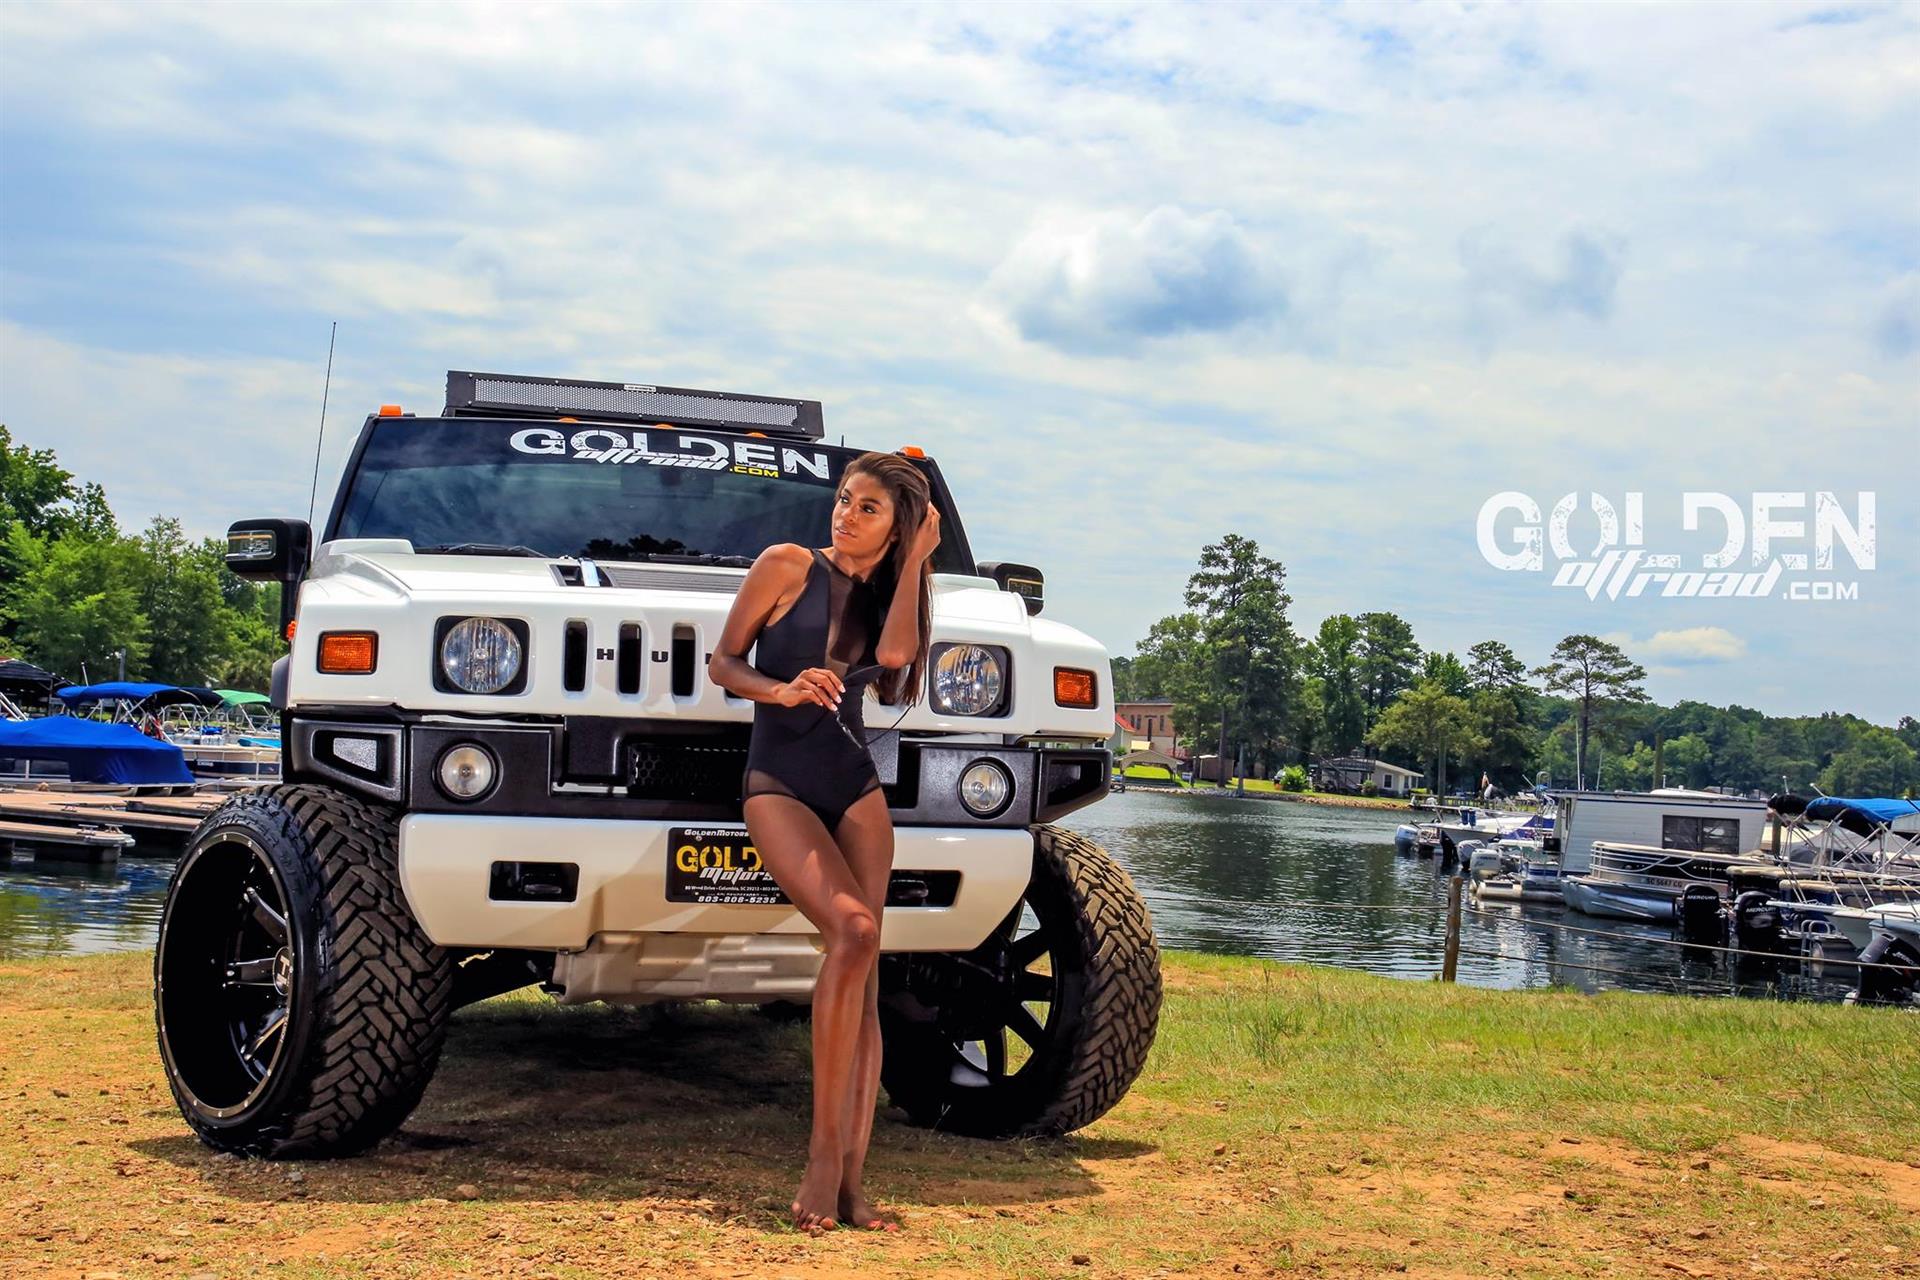 Female model standing in front of a truck with new wheels and tires